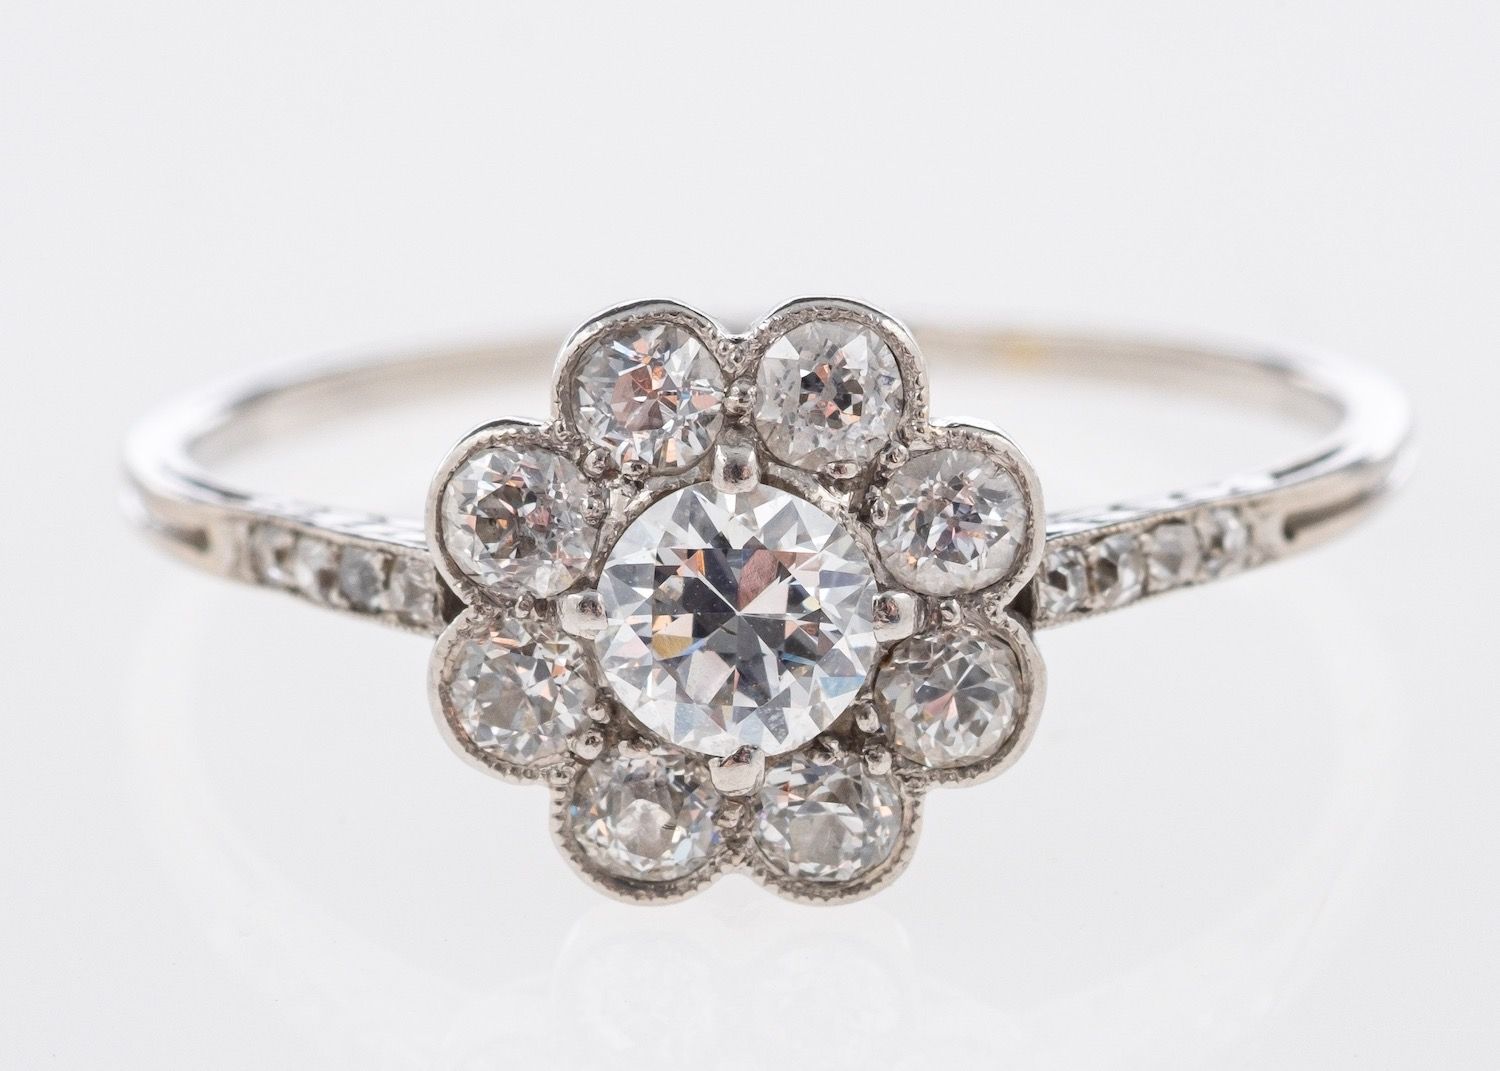 An Art Deco flowerhead ring, milgrain and claw set with old brilliant-cut diamonds,